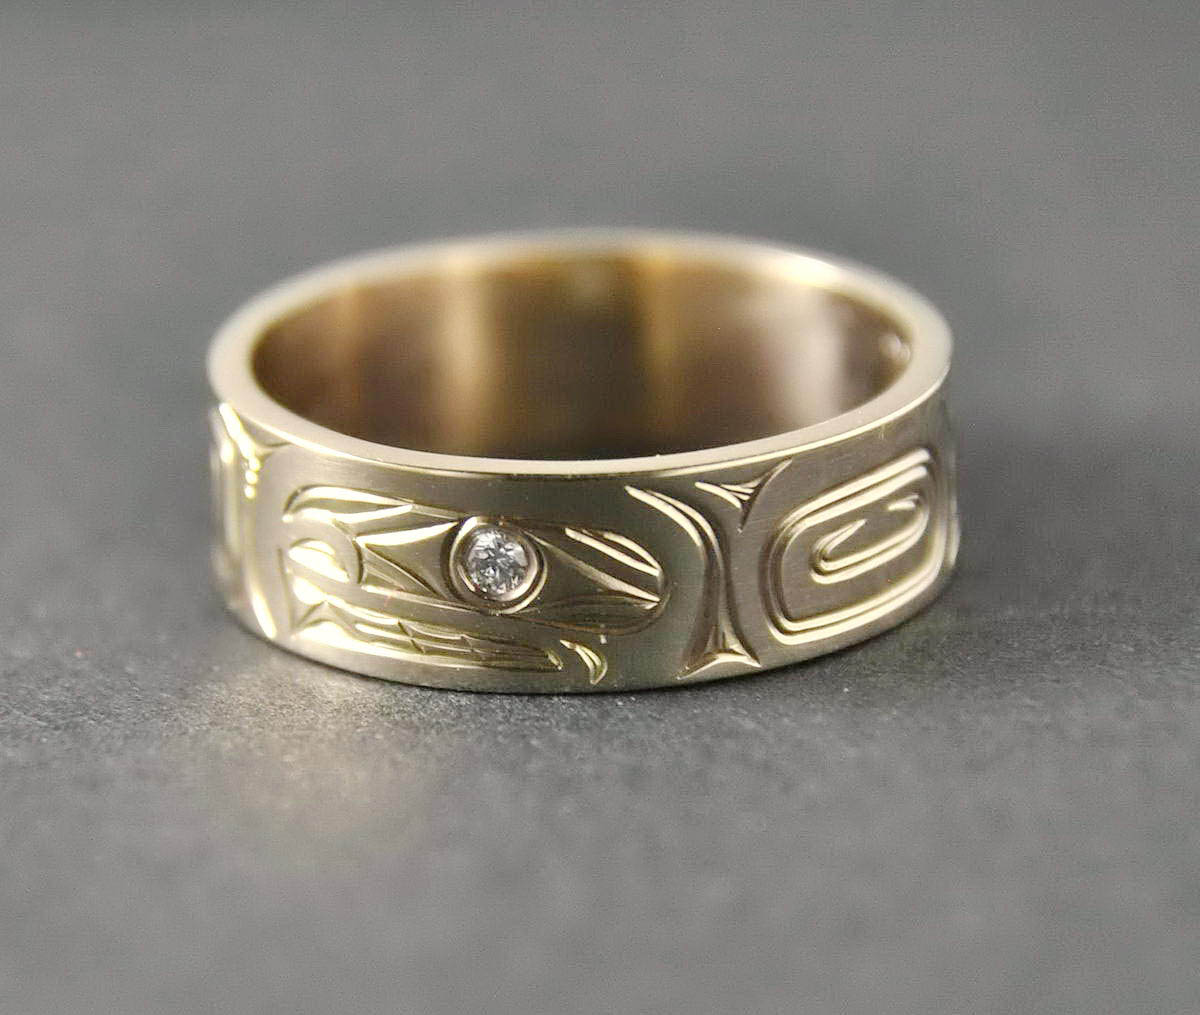 Orca (Killerwhale) Gold Ring